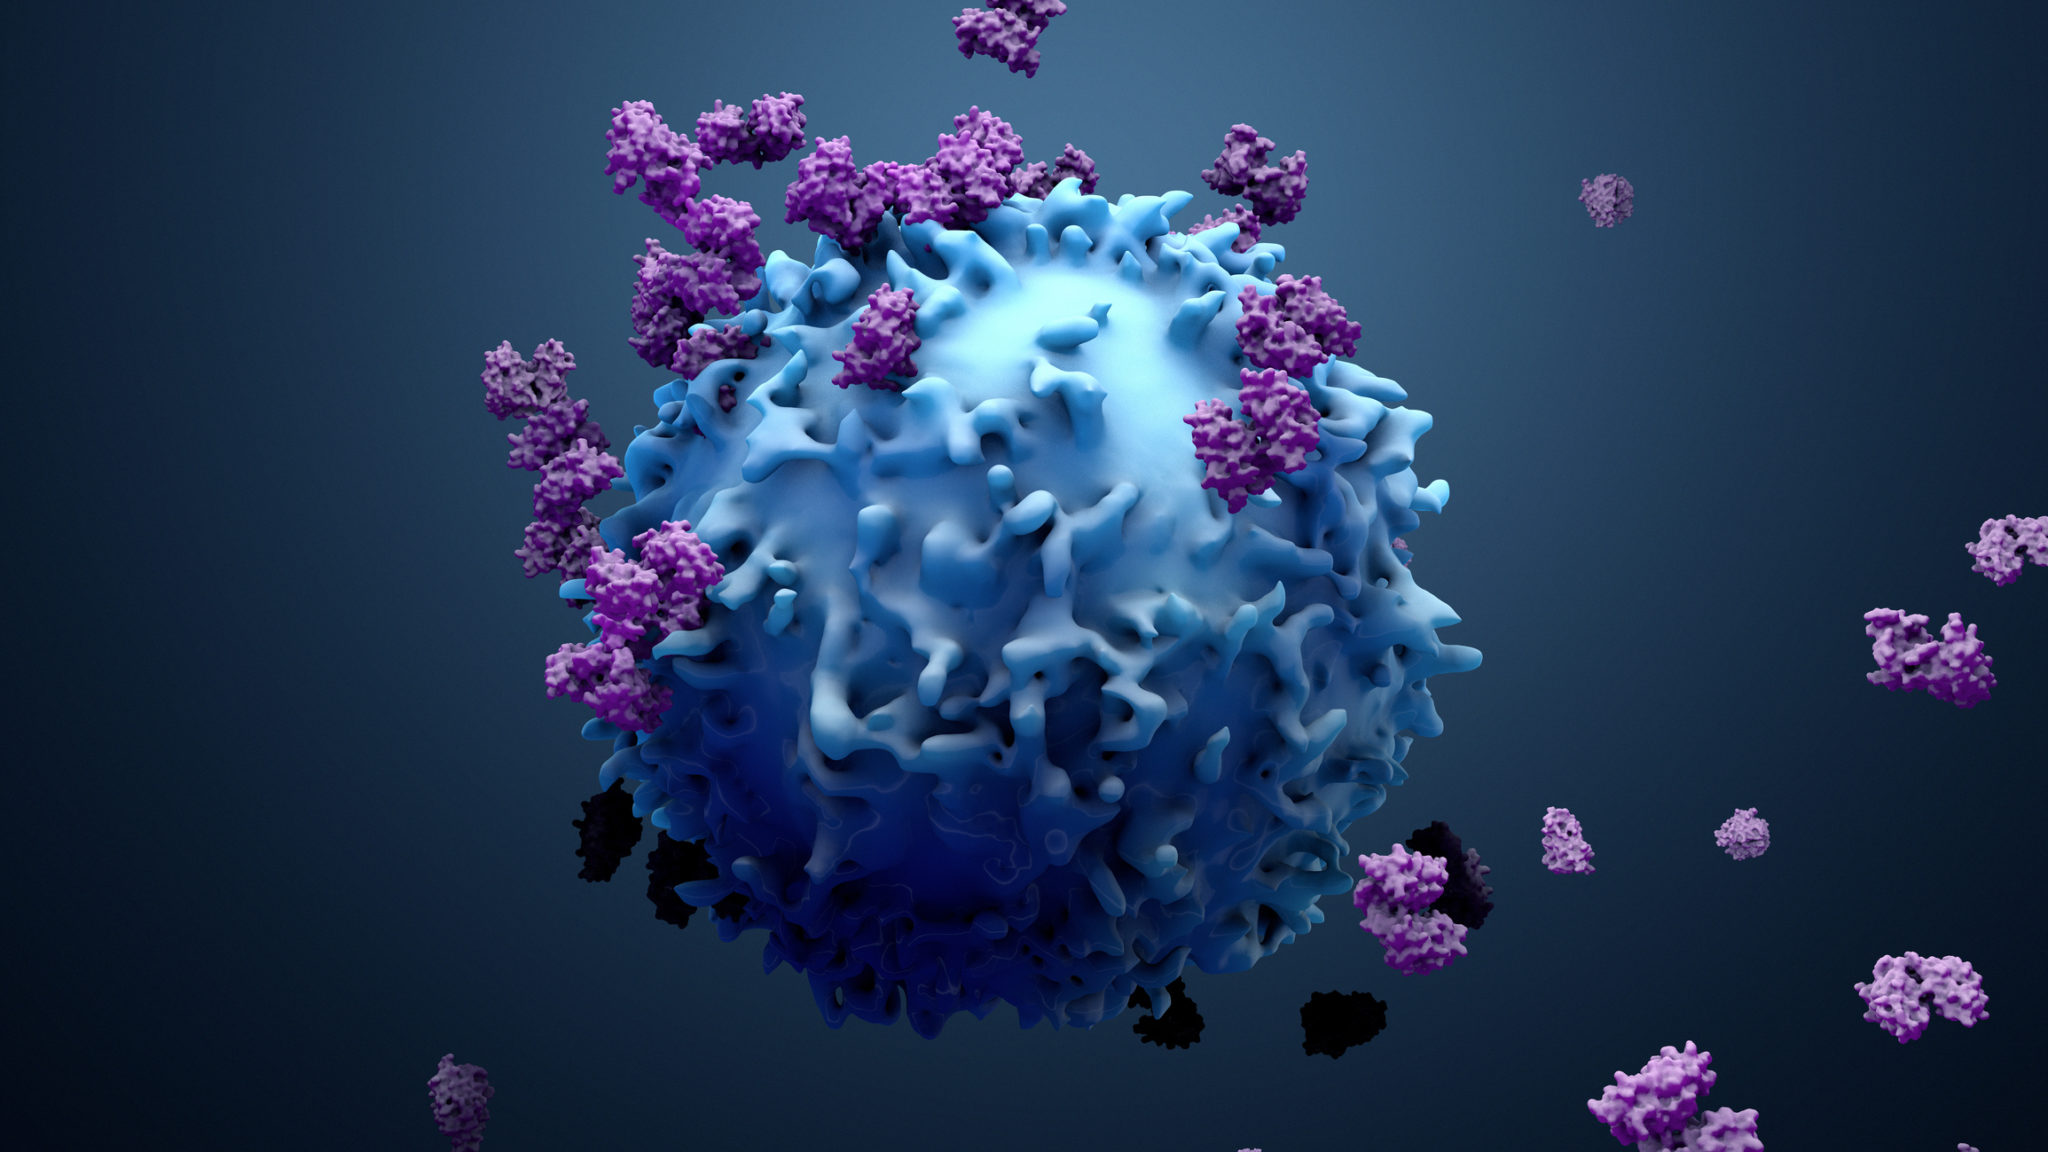 A risky cancer treatment can be modified to treat immune diseases